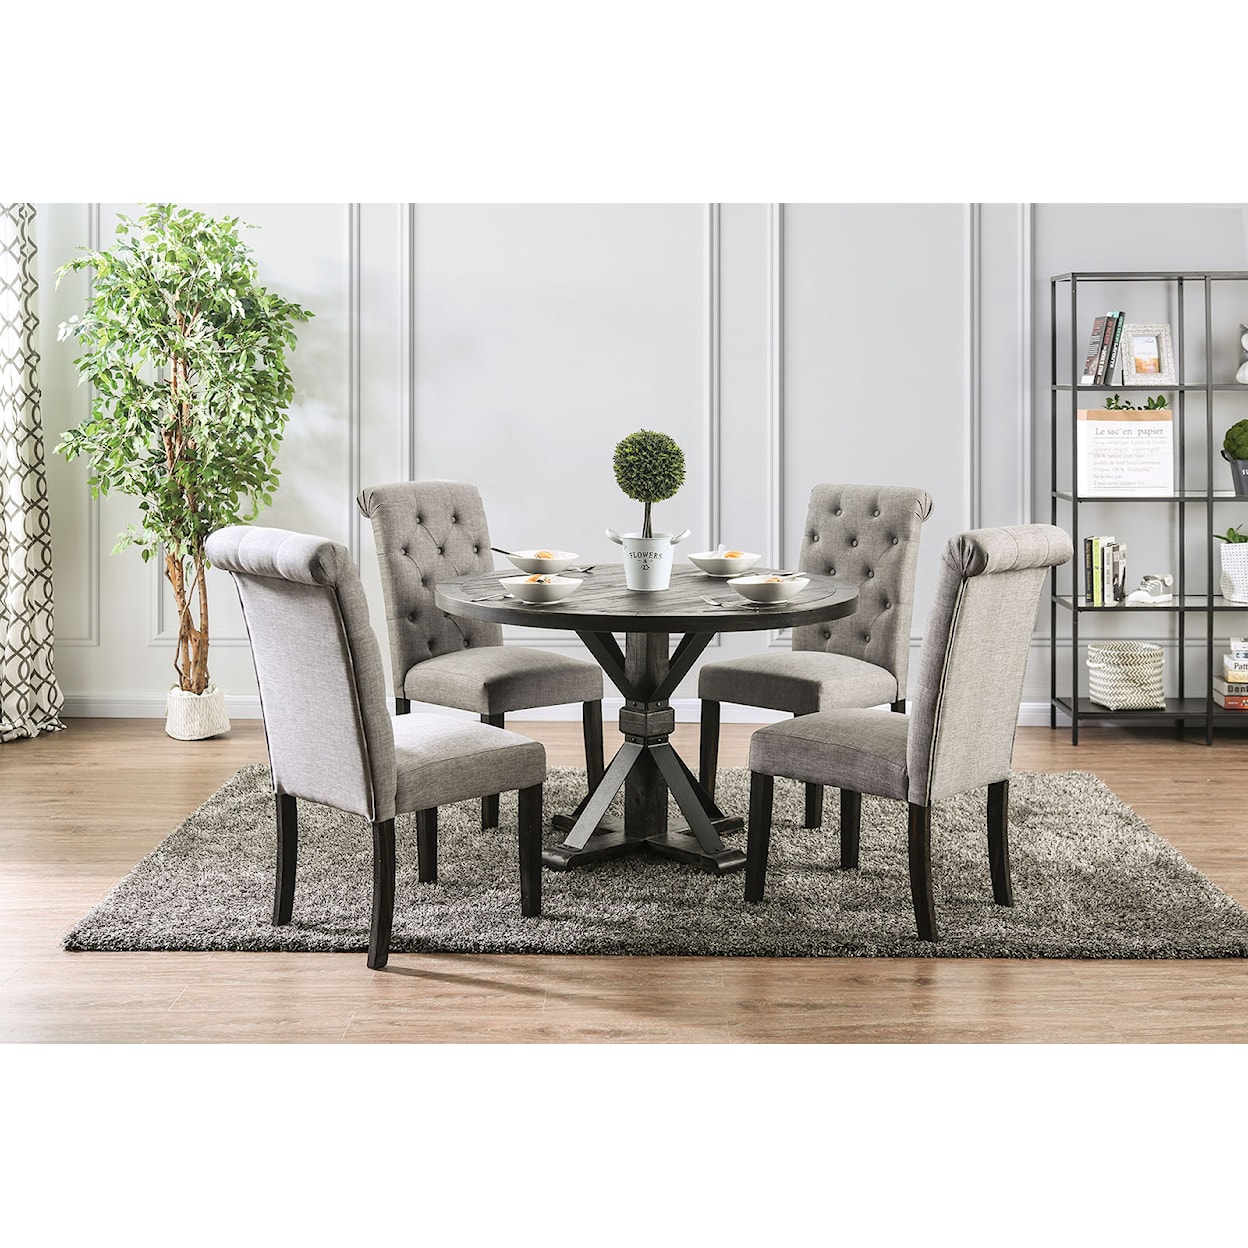 FUSA Alfred 5 Pc. Round Dining Table Set